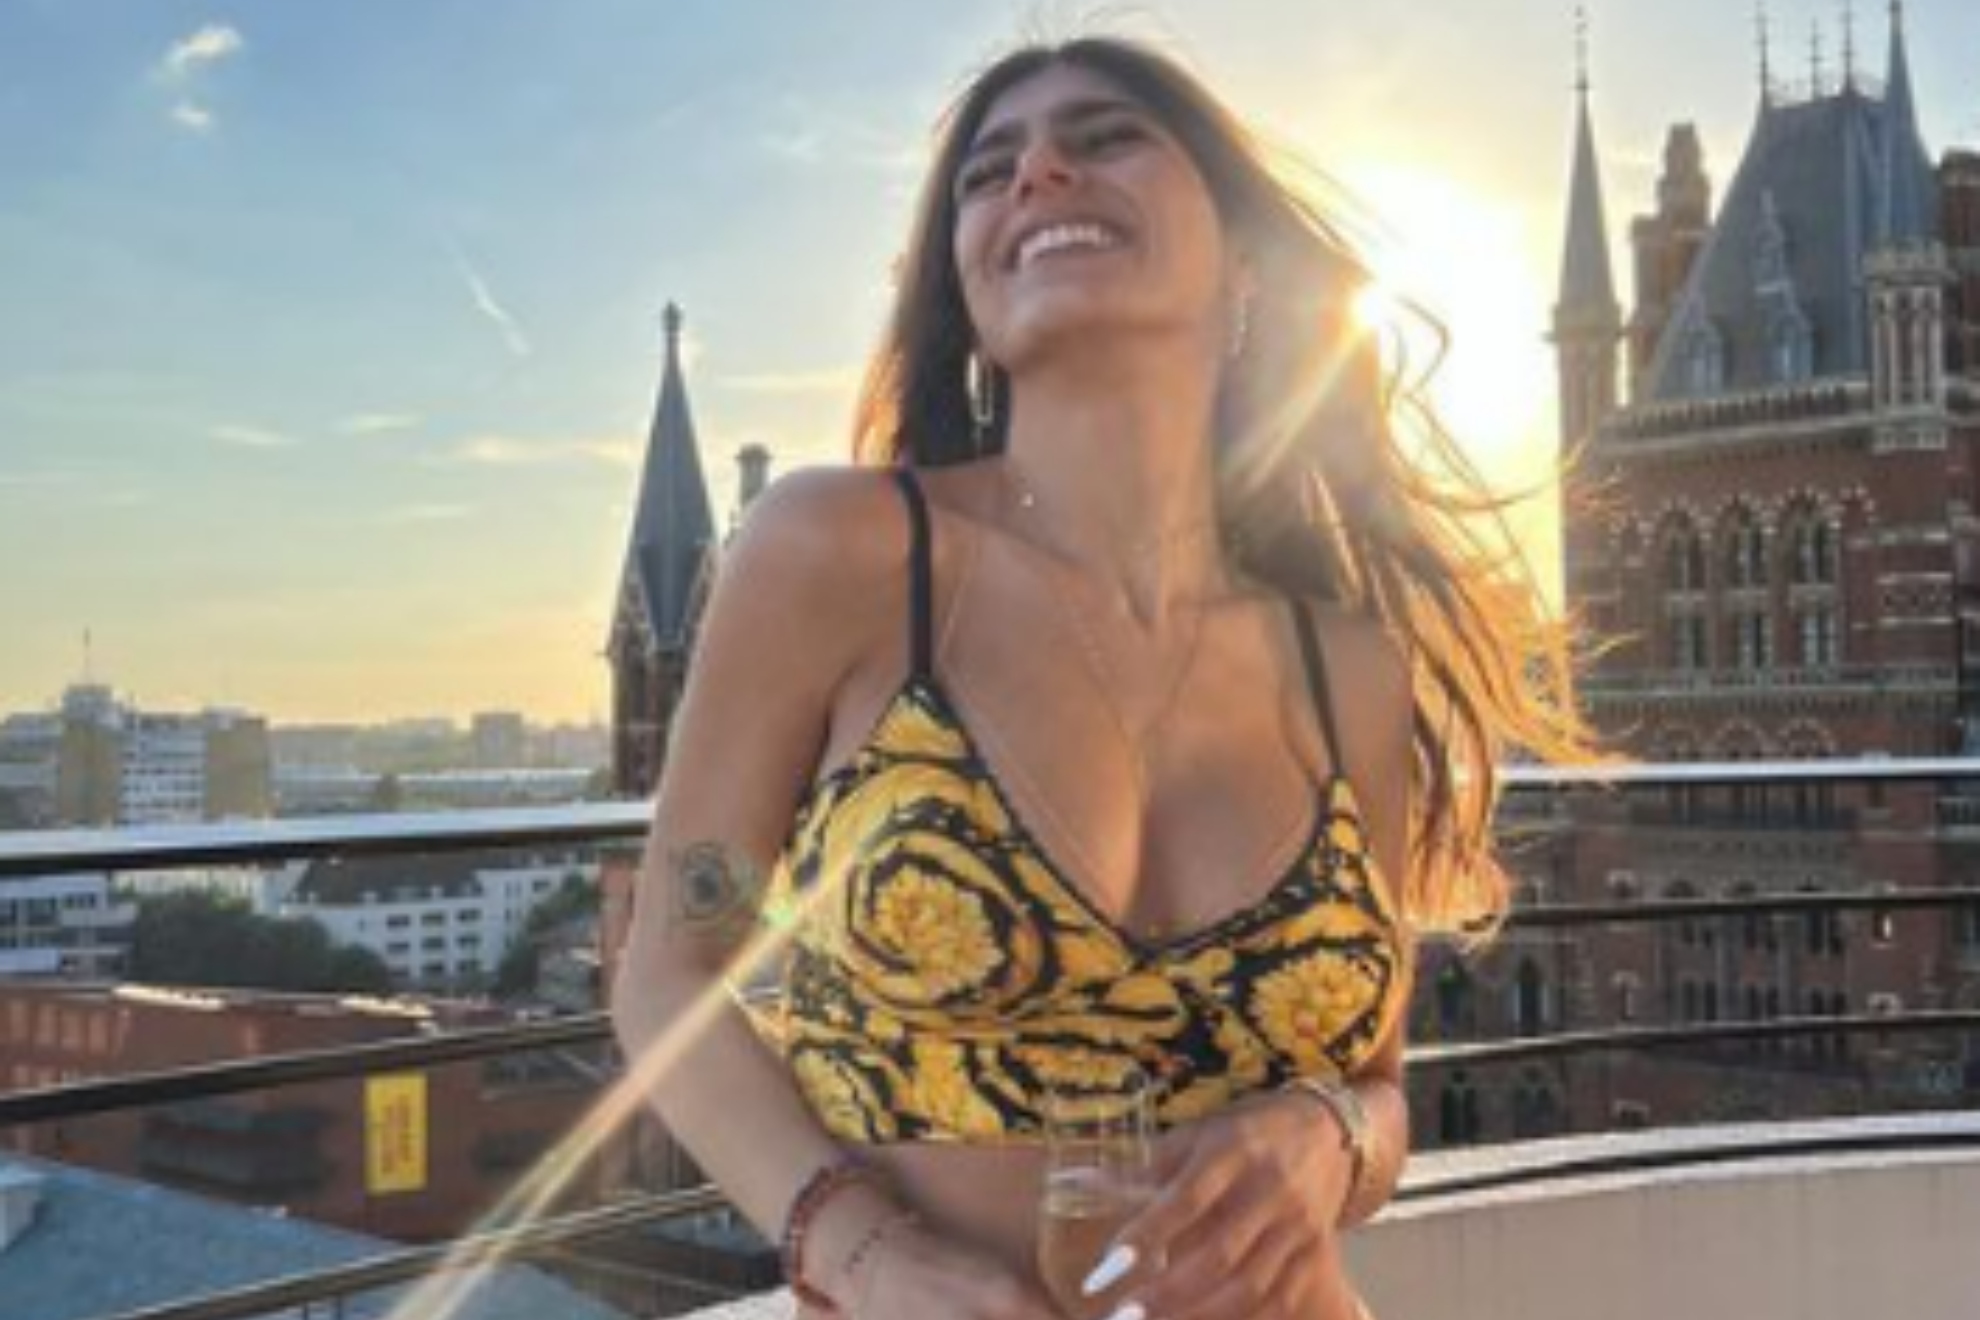 How much did Mia Khalifa earn in her active years as a porn actress? Marca